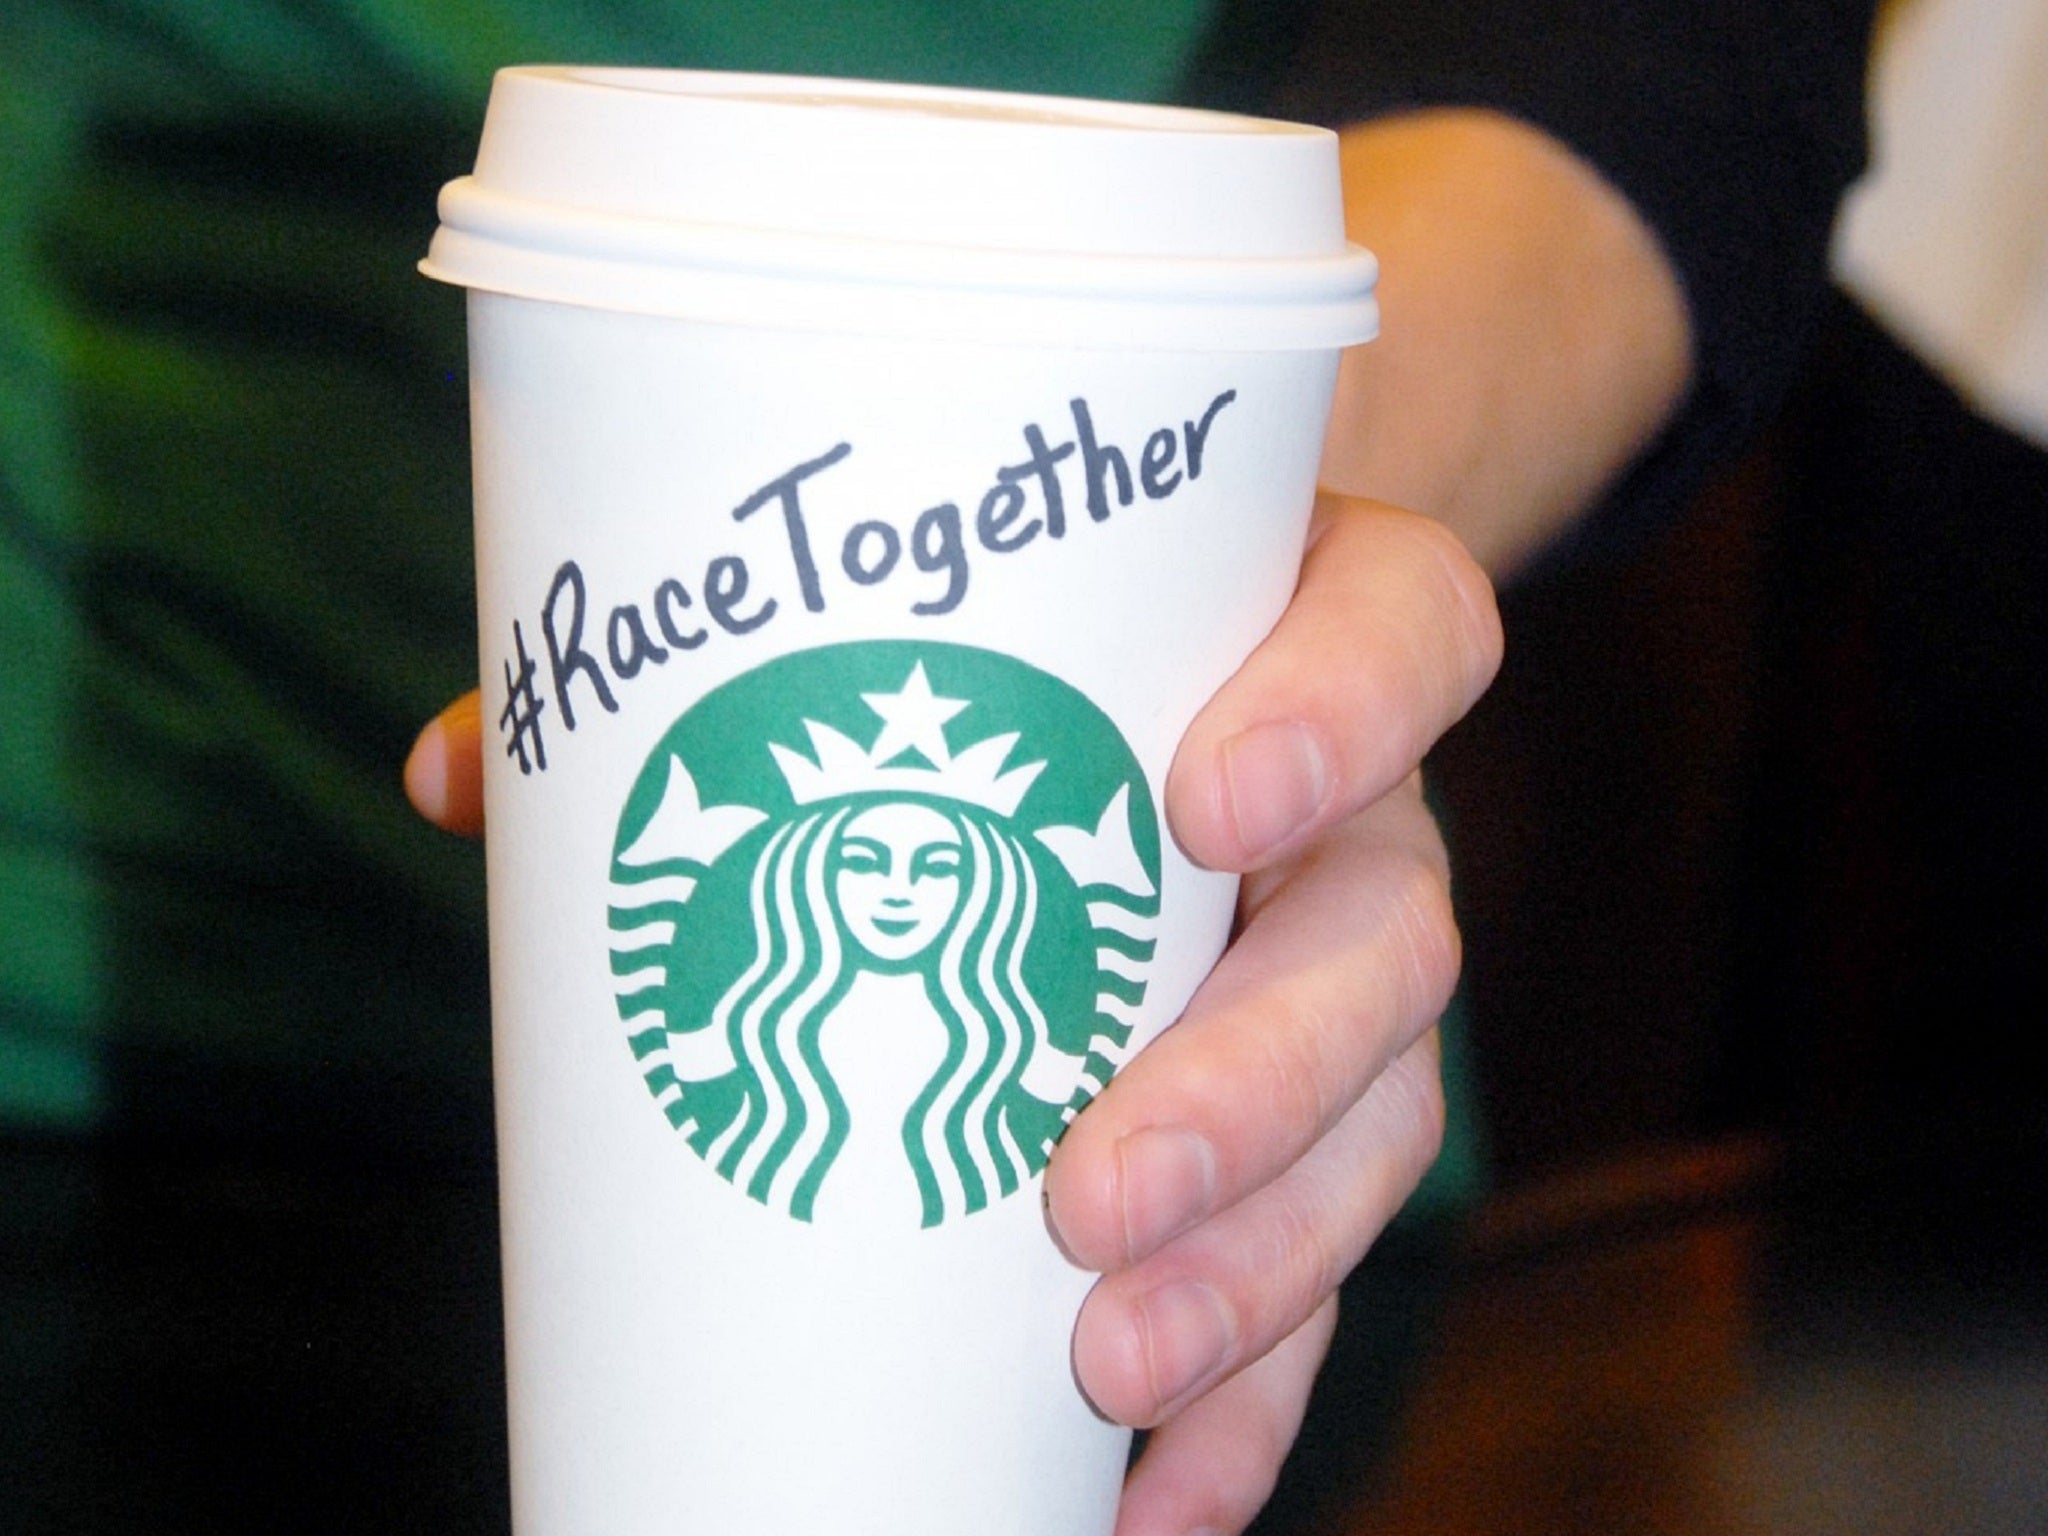 Starbucks scrapped the idea to carry on writing "Race Together" on customers' cups